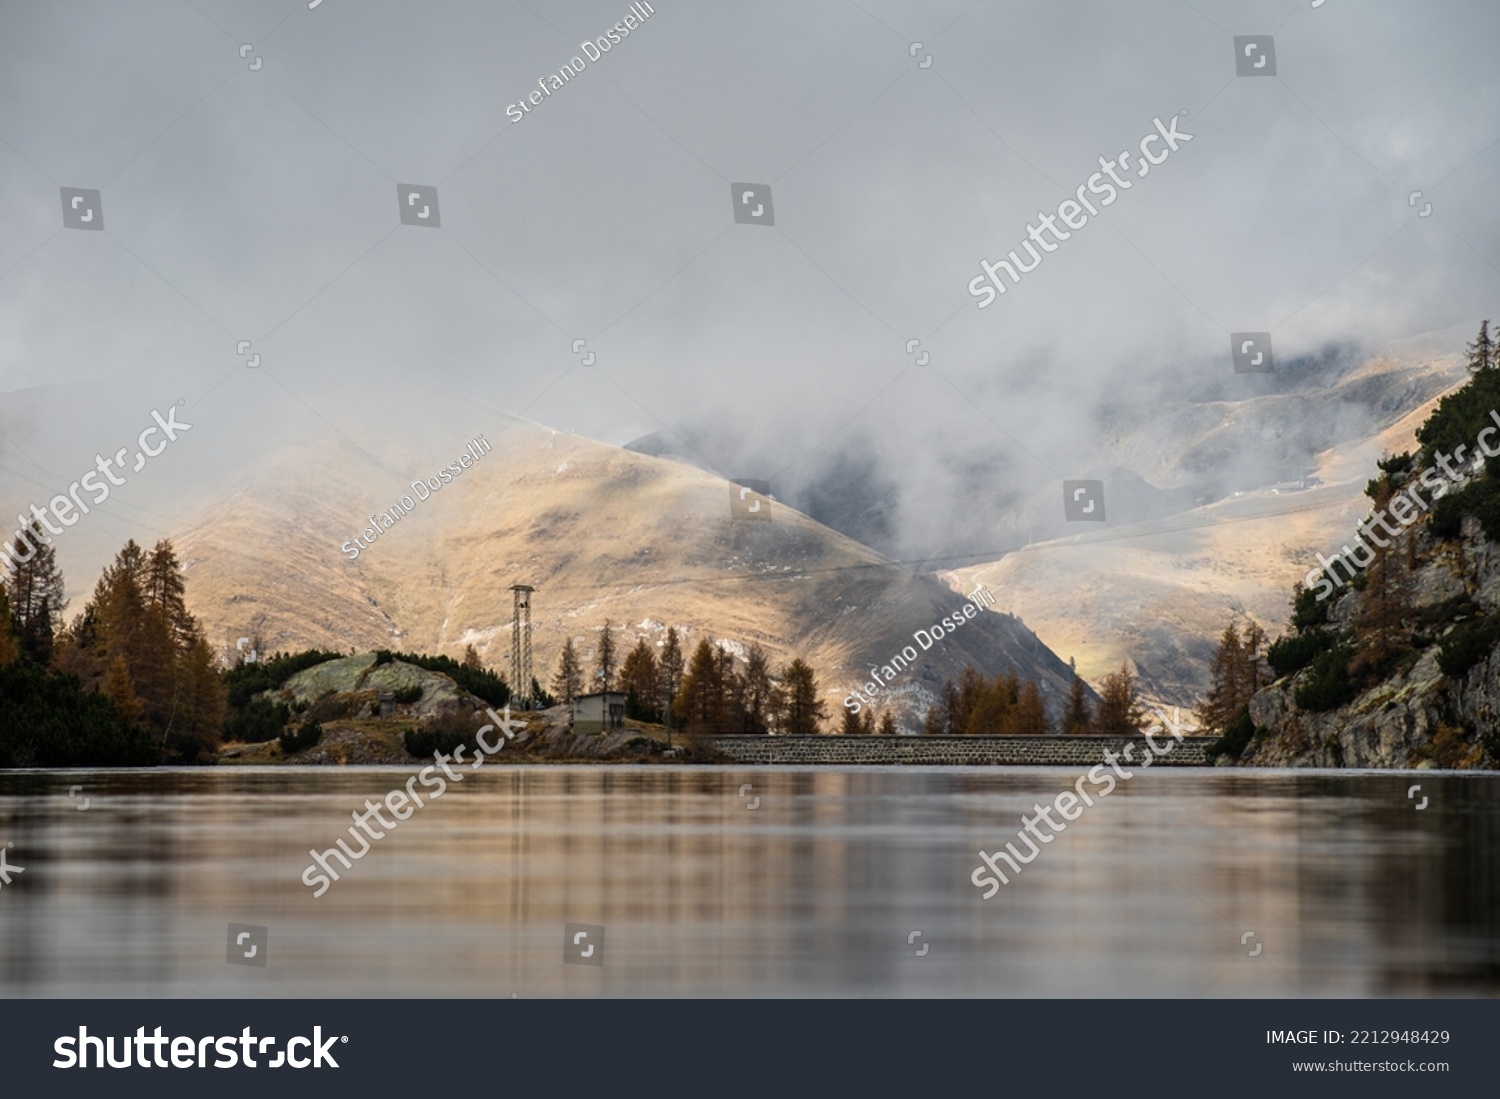 Low angle shot from the surface of the water of Lago Marcio, with orange hills and low clouds in the background, Northern Italy #2212948429